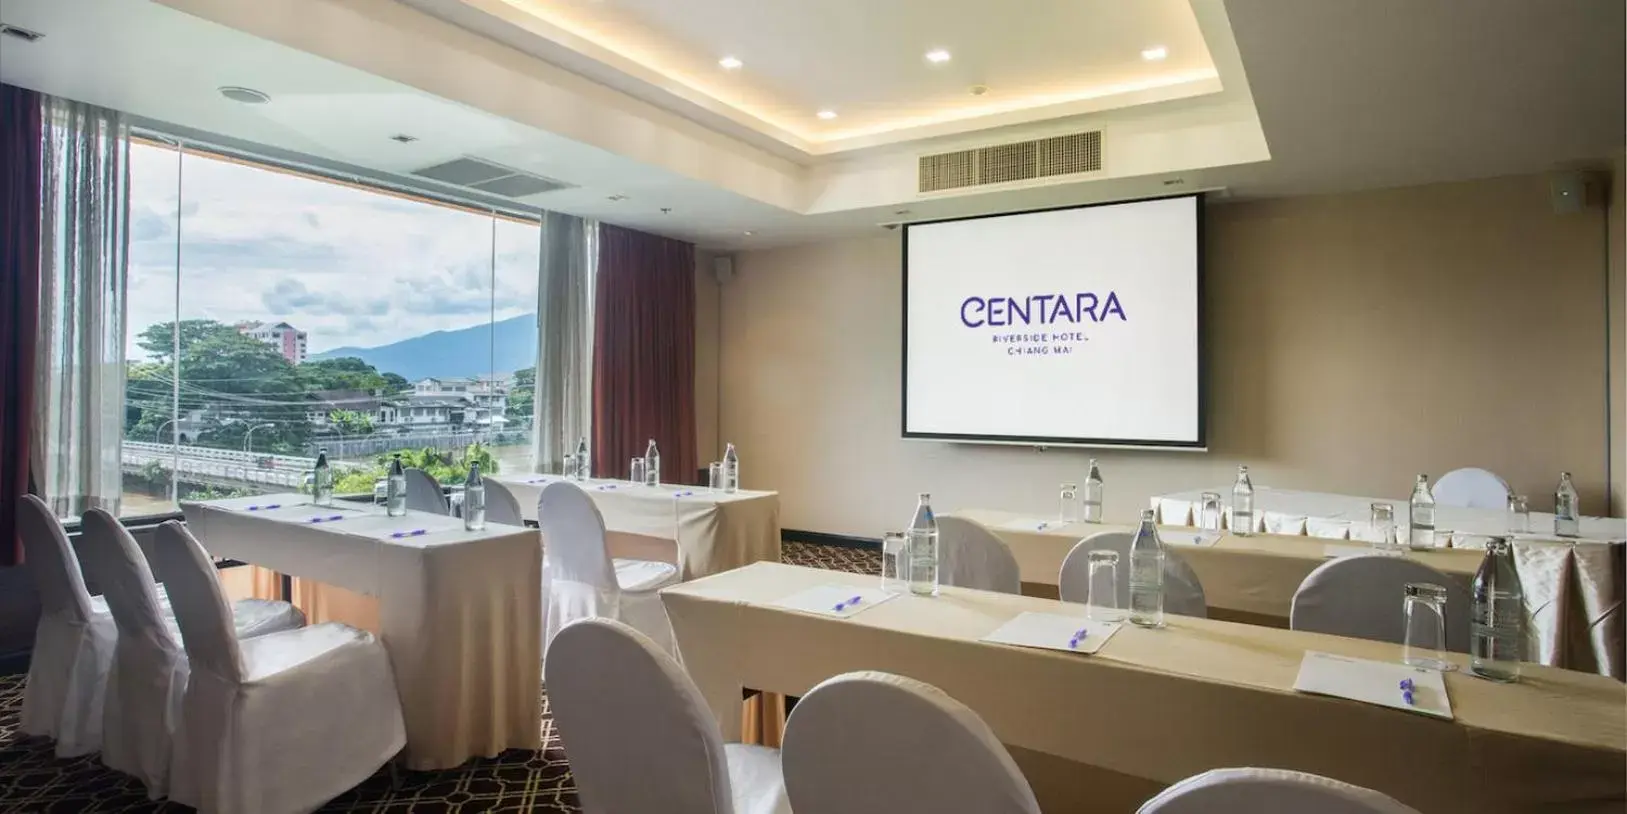 Meeting/conference room in Centara Riverside Hotel Chiang Mai